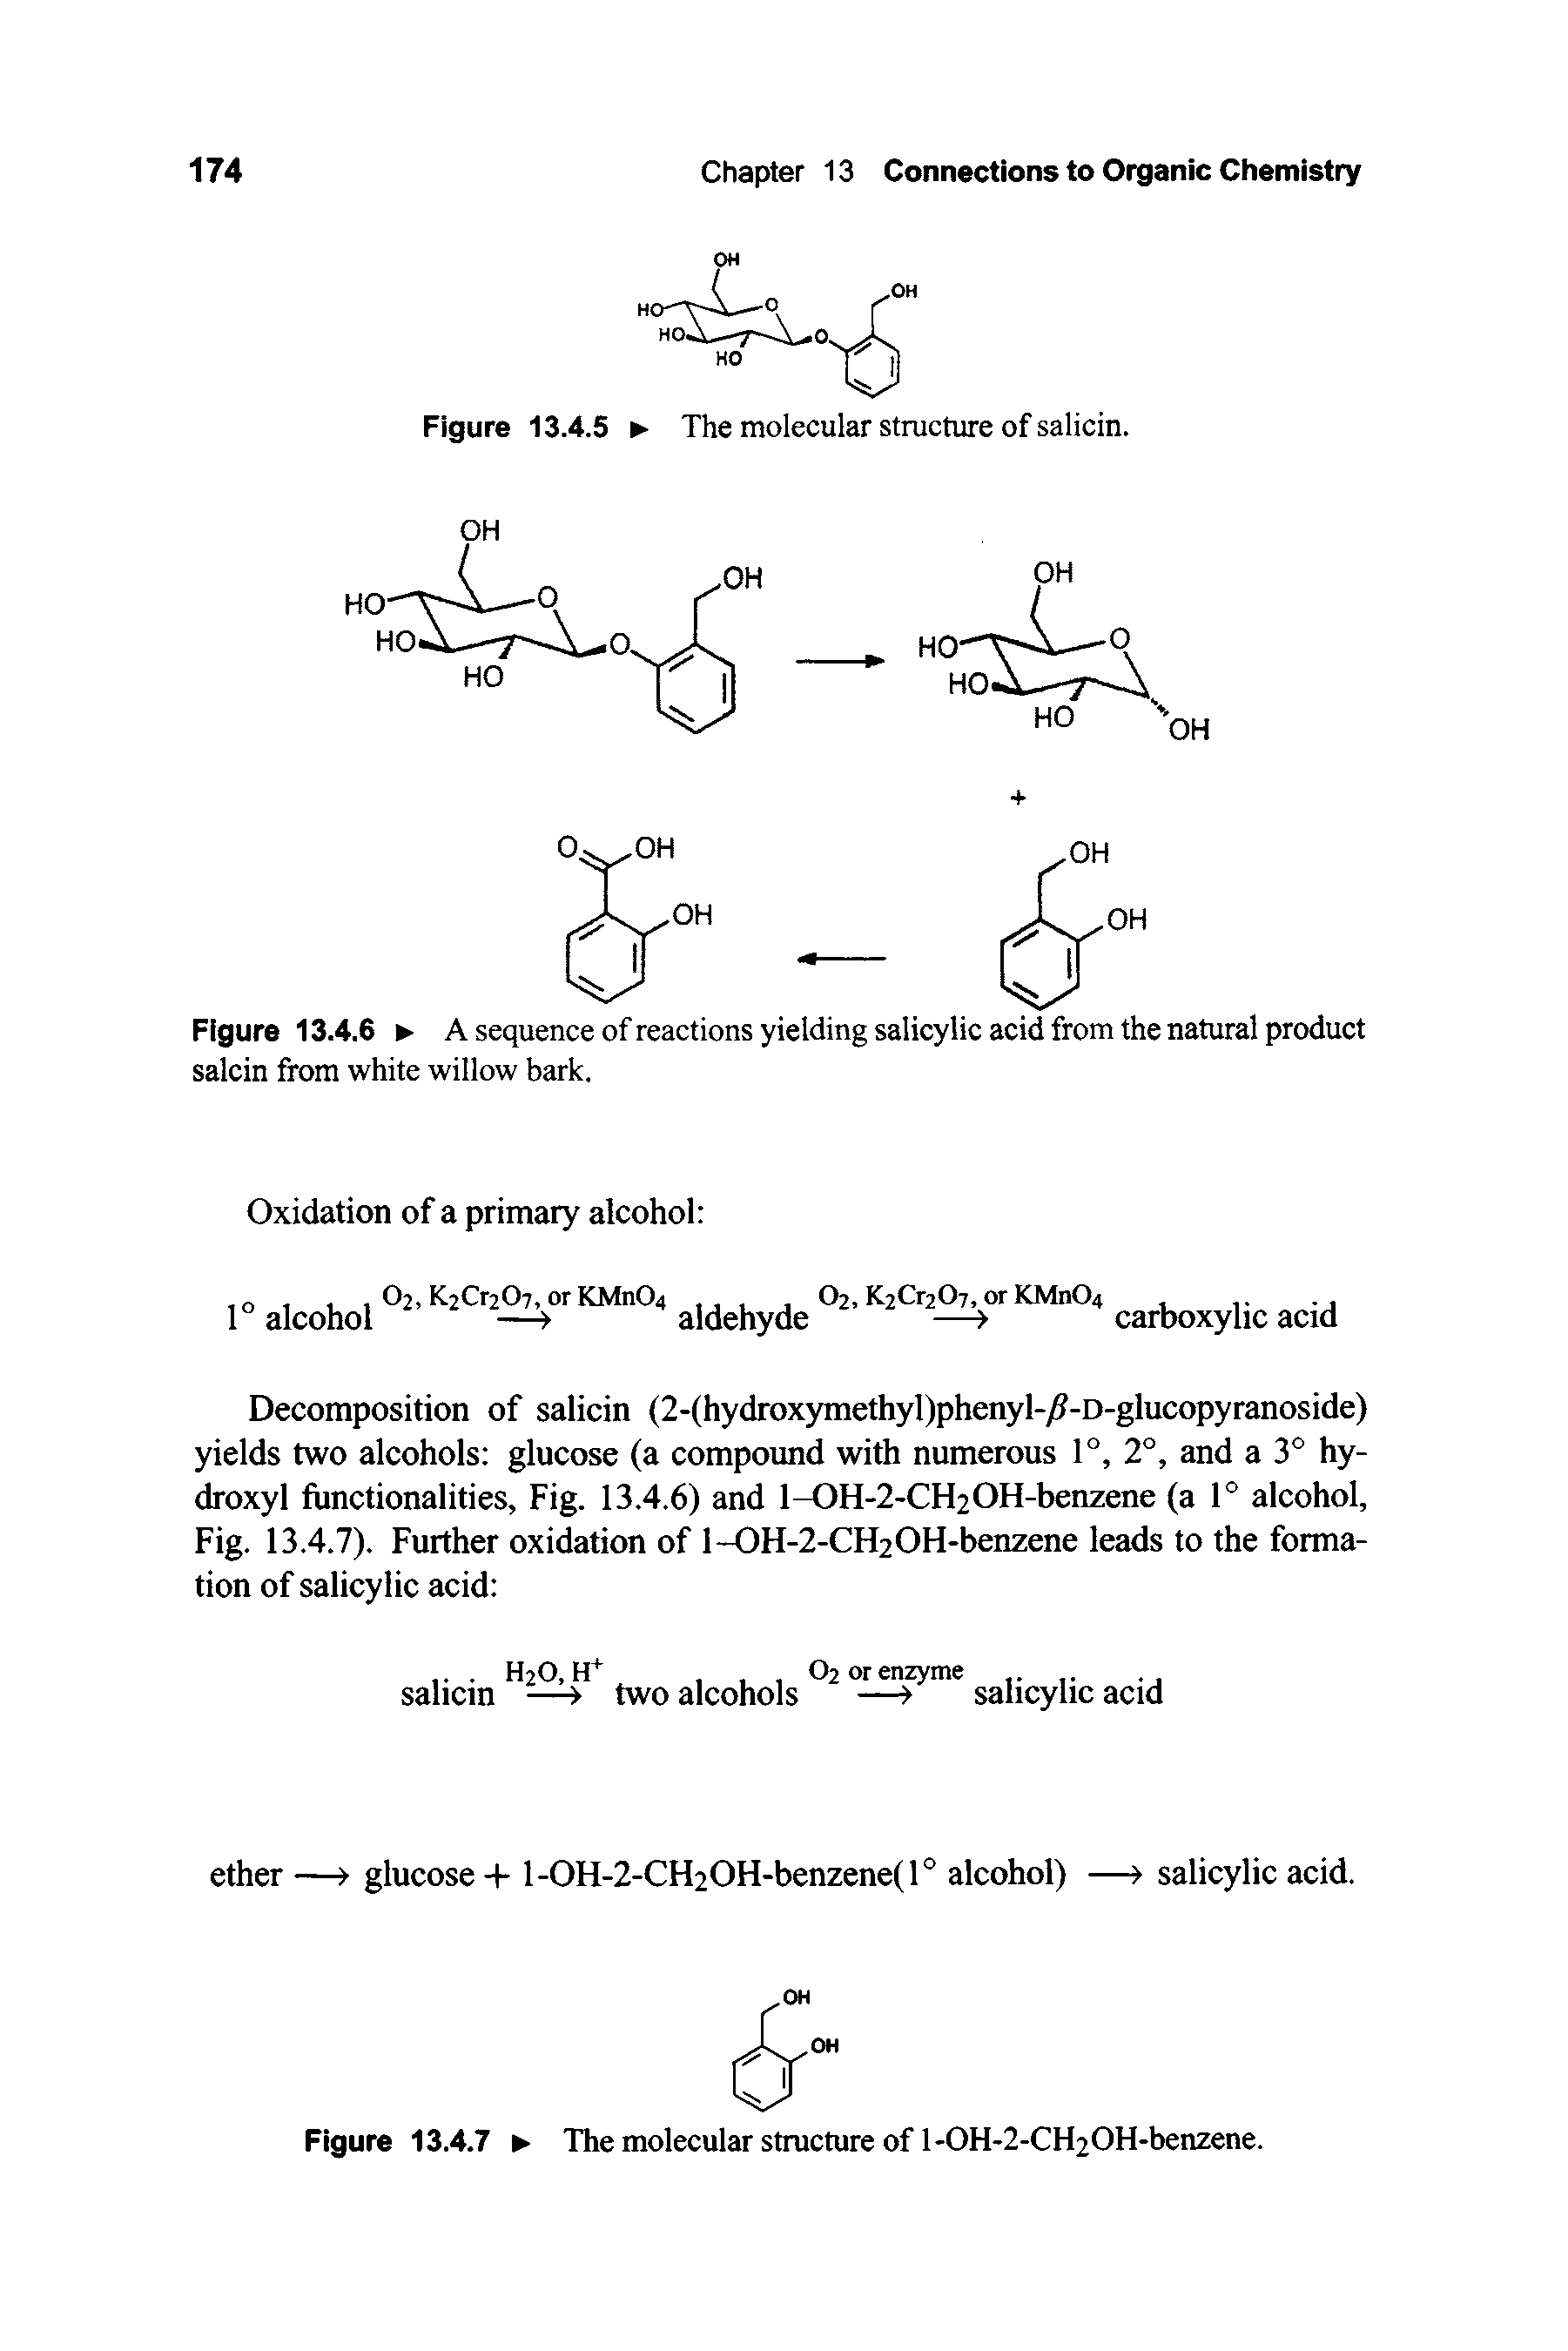 Figure 13.4.6 A sequence of reactions yielding salicylic acid from the natural product salcin from white willow bark.